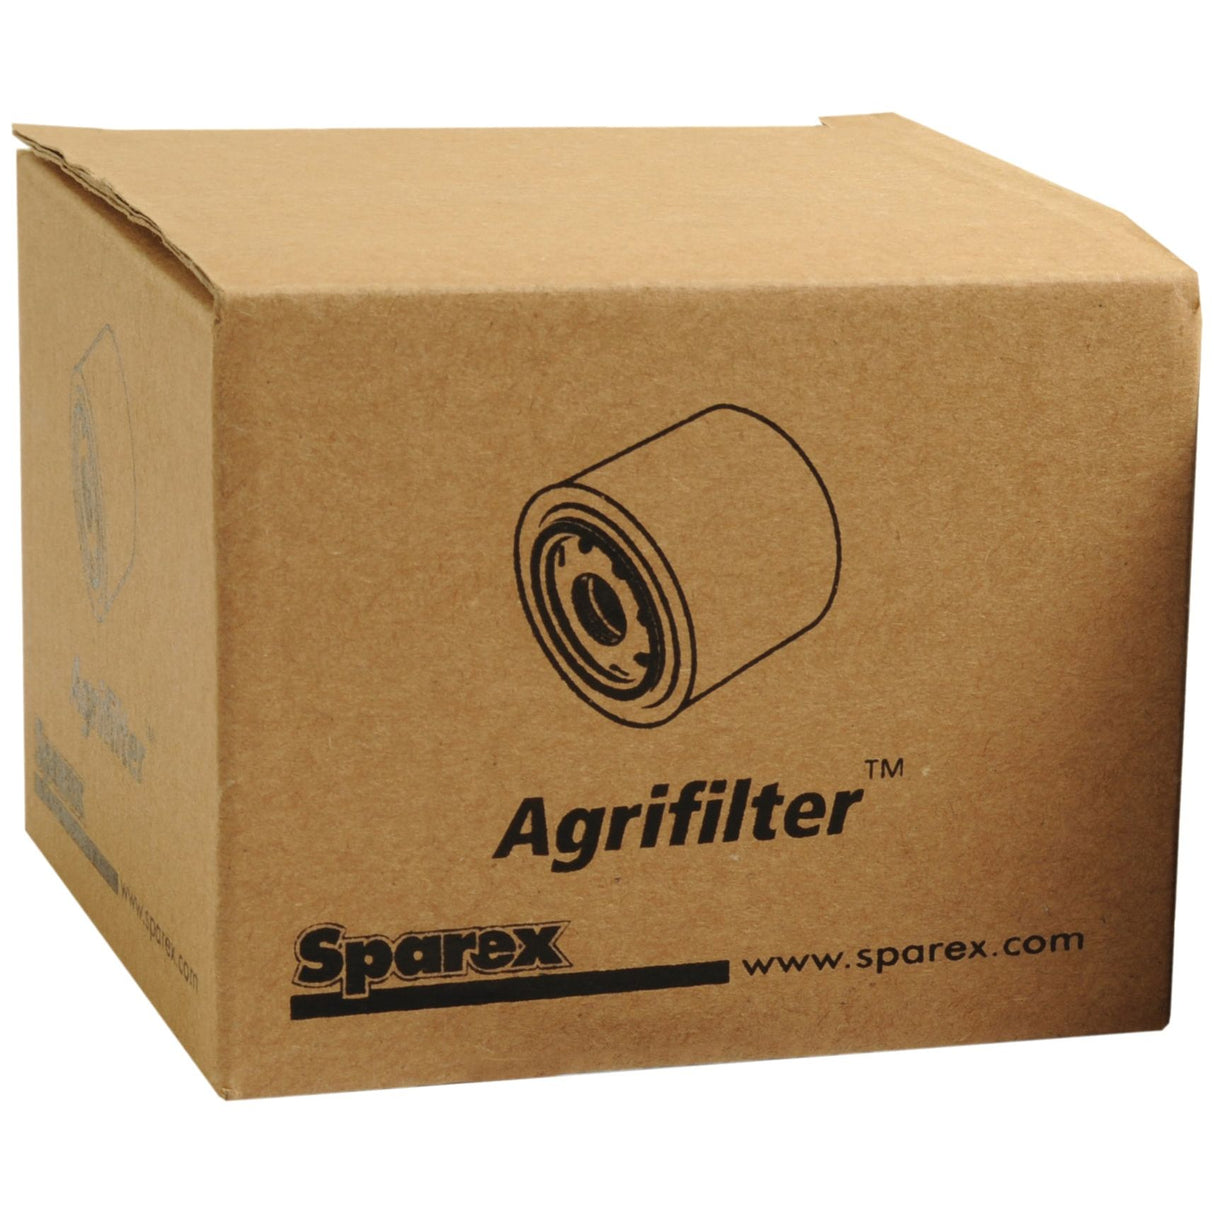 Oil Filter - Spin On -
 - S.76501 - Farming Parts